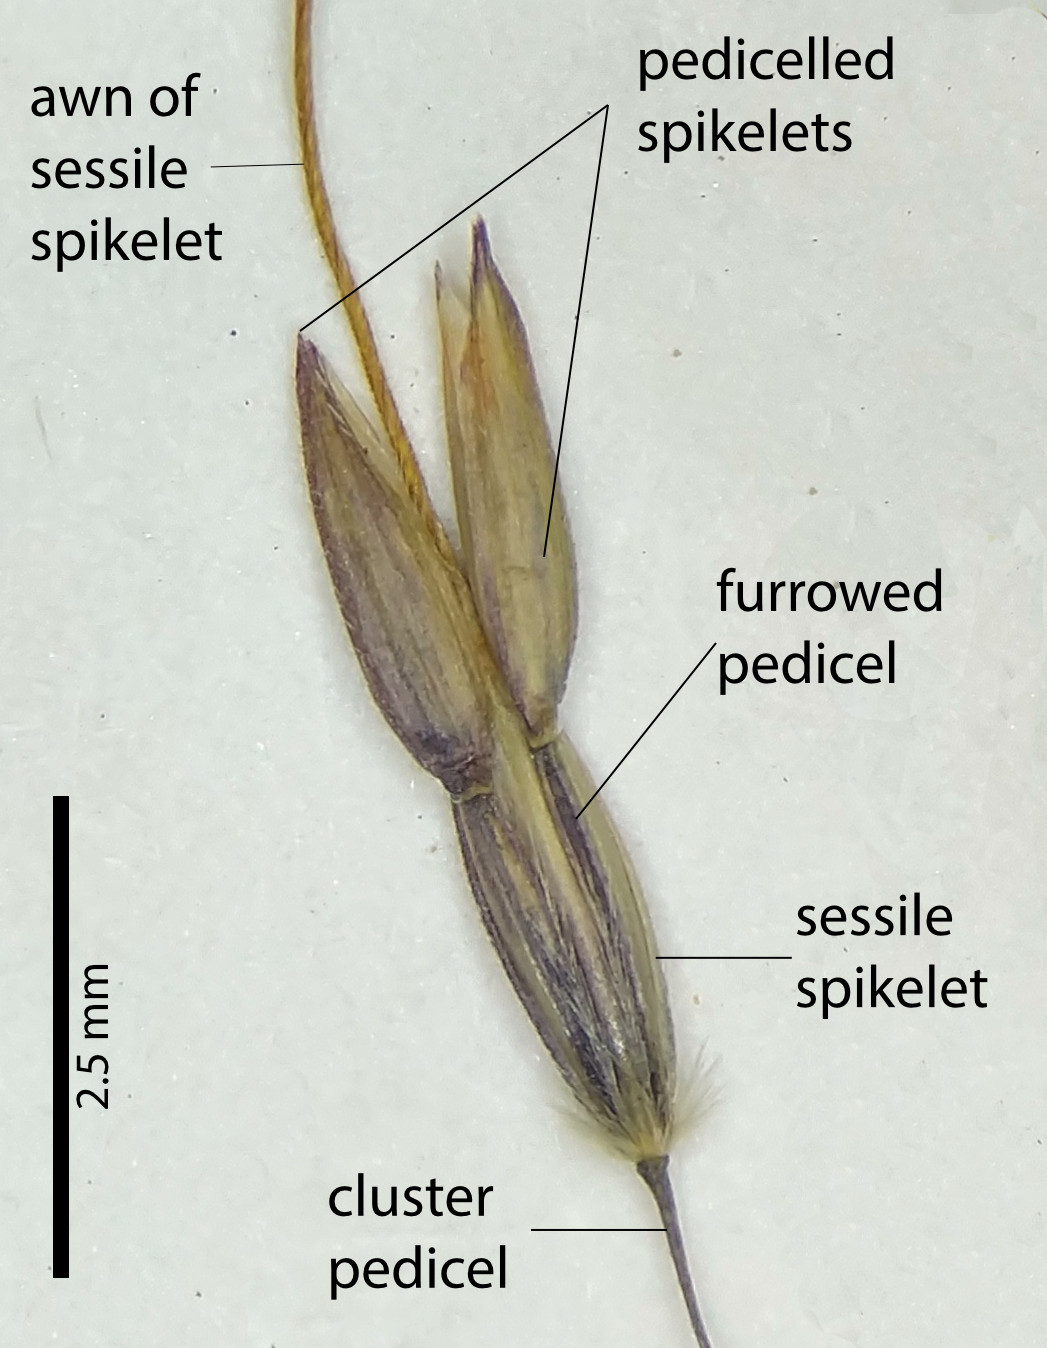 Fig. 4a. Spikelet cluster of Capillipedium parviflorum showing furrowed pedicel of pedicelled spikelets (PHOTO: ATH, specimen: QRS6736).